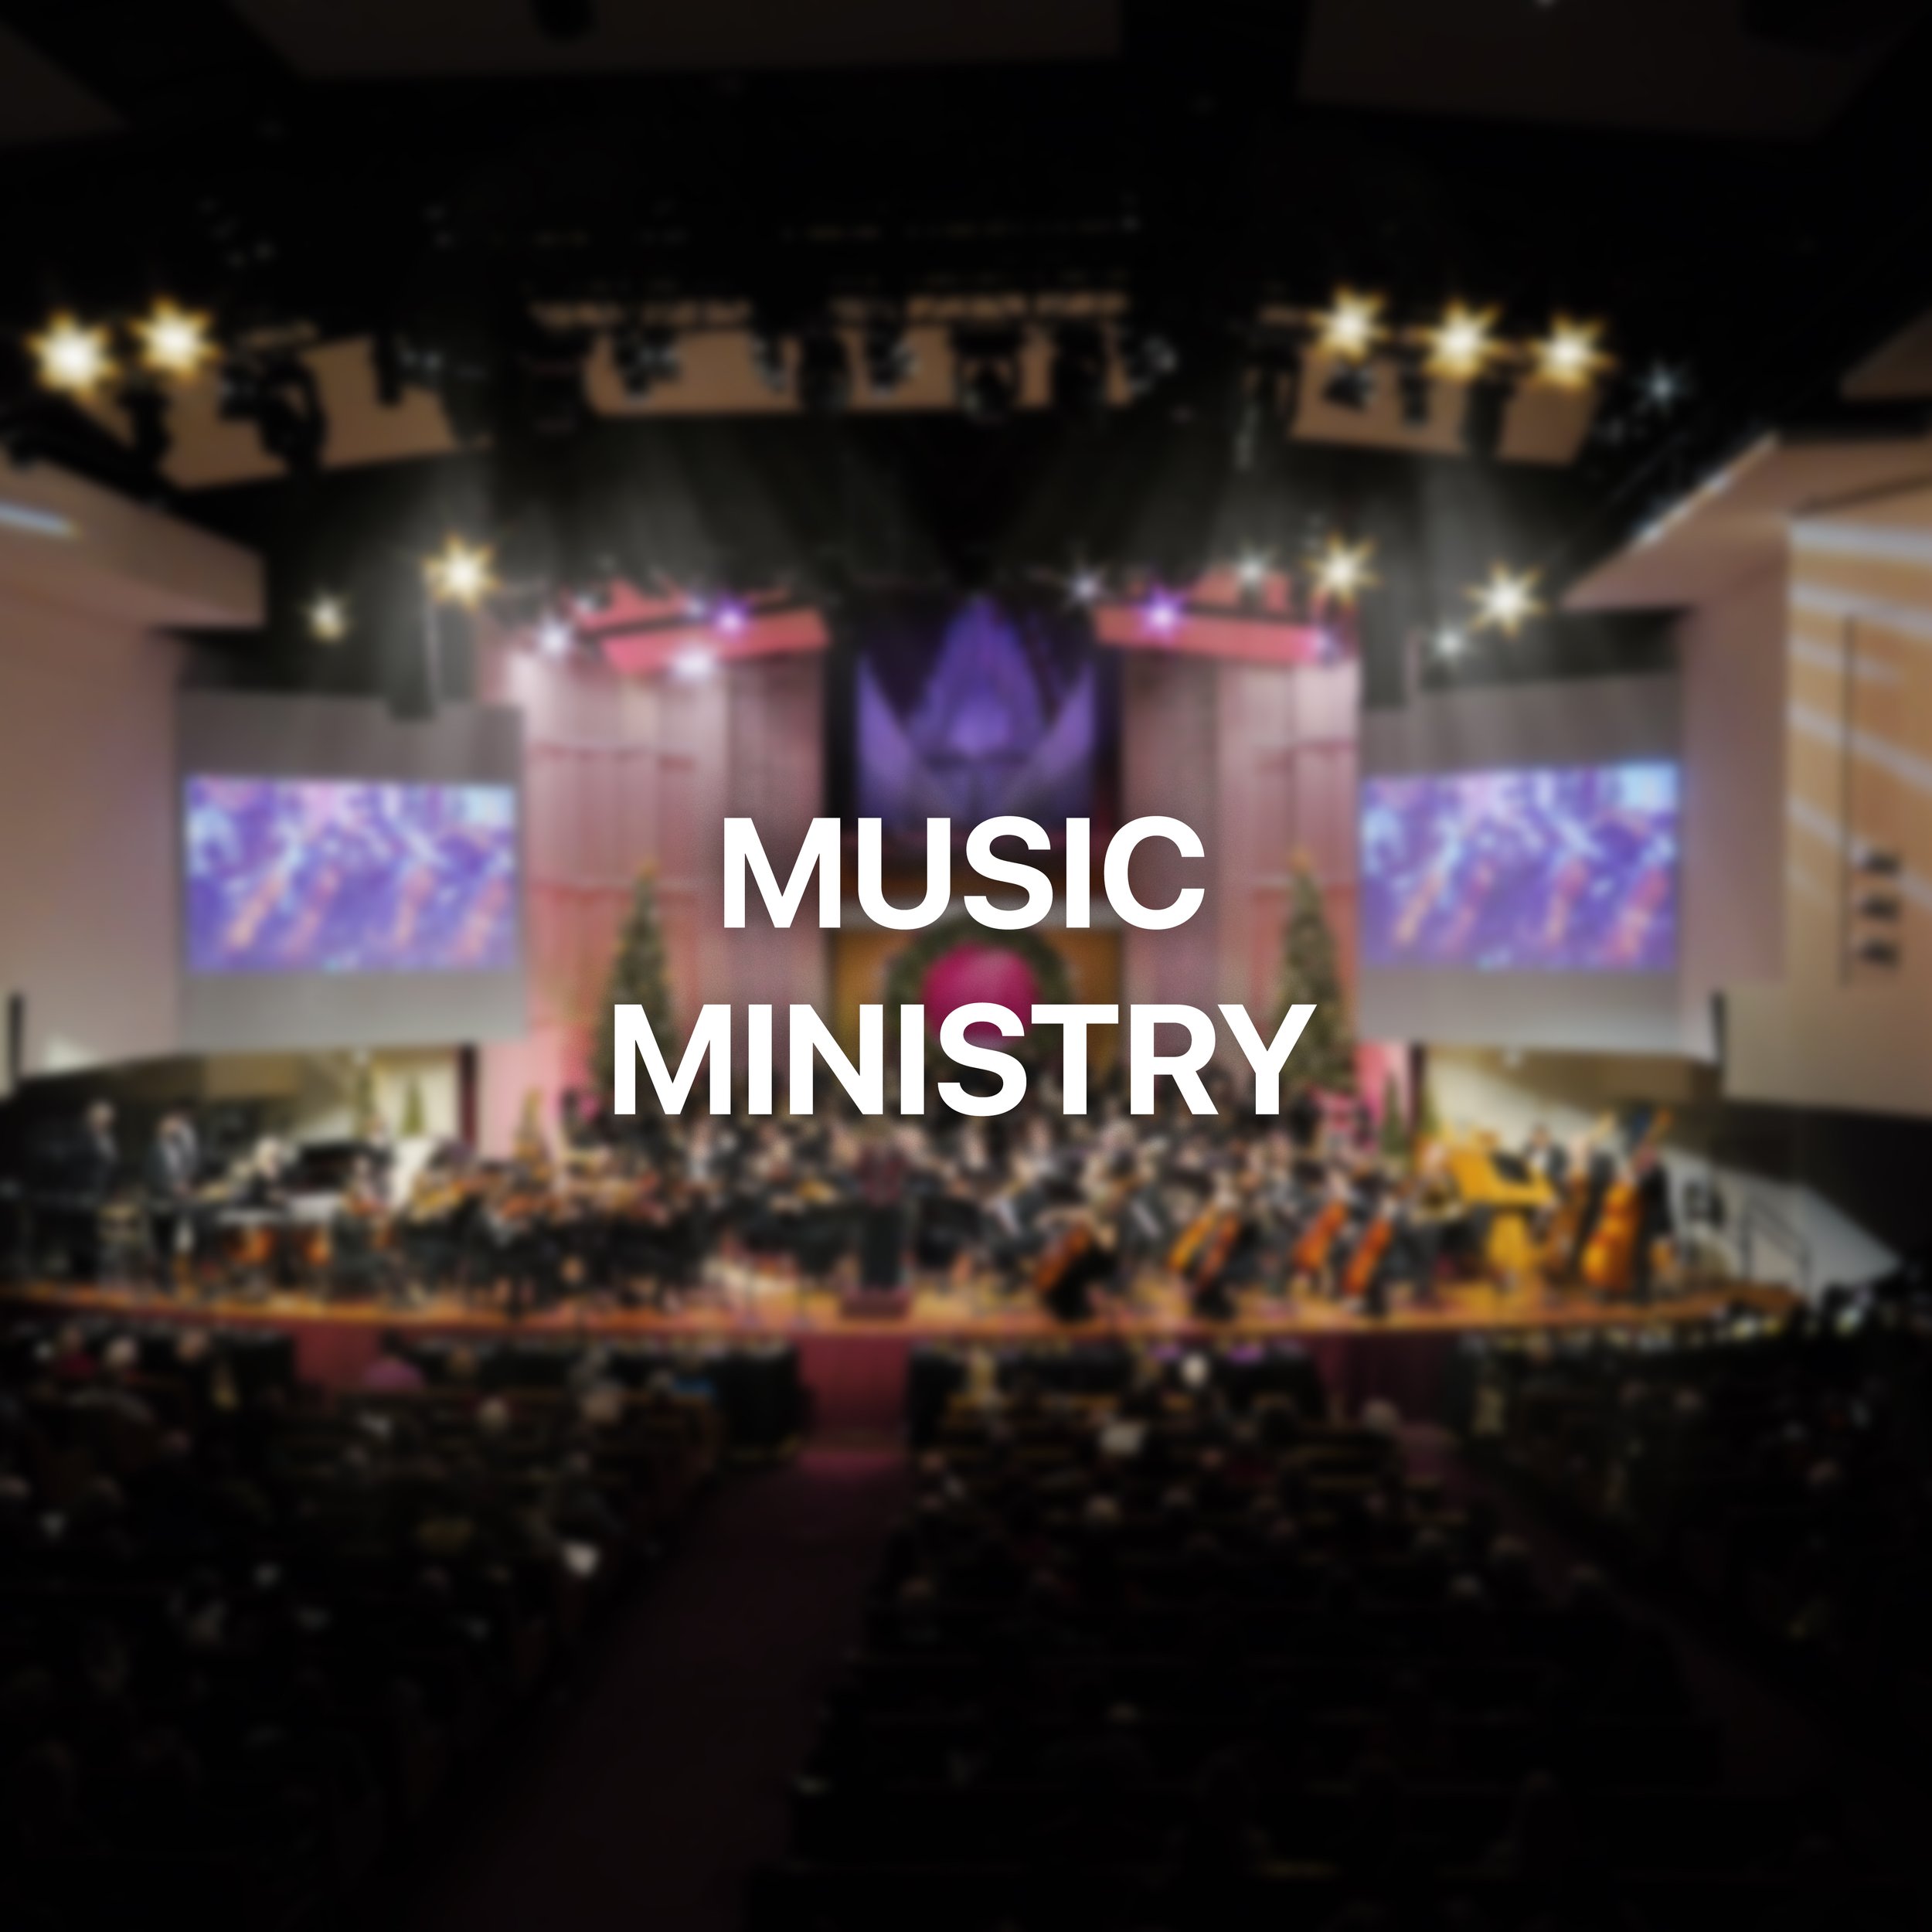 MUSIC MINISTRY